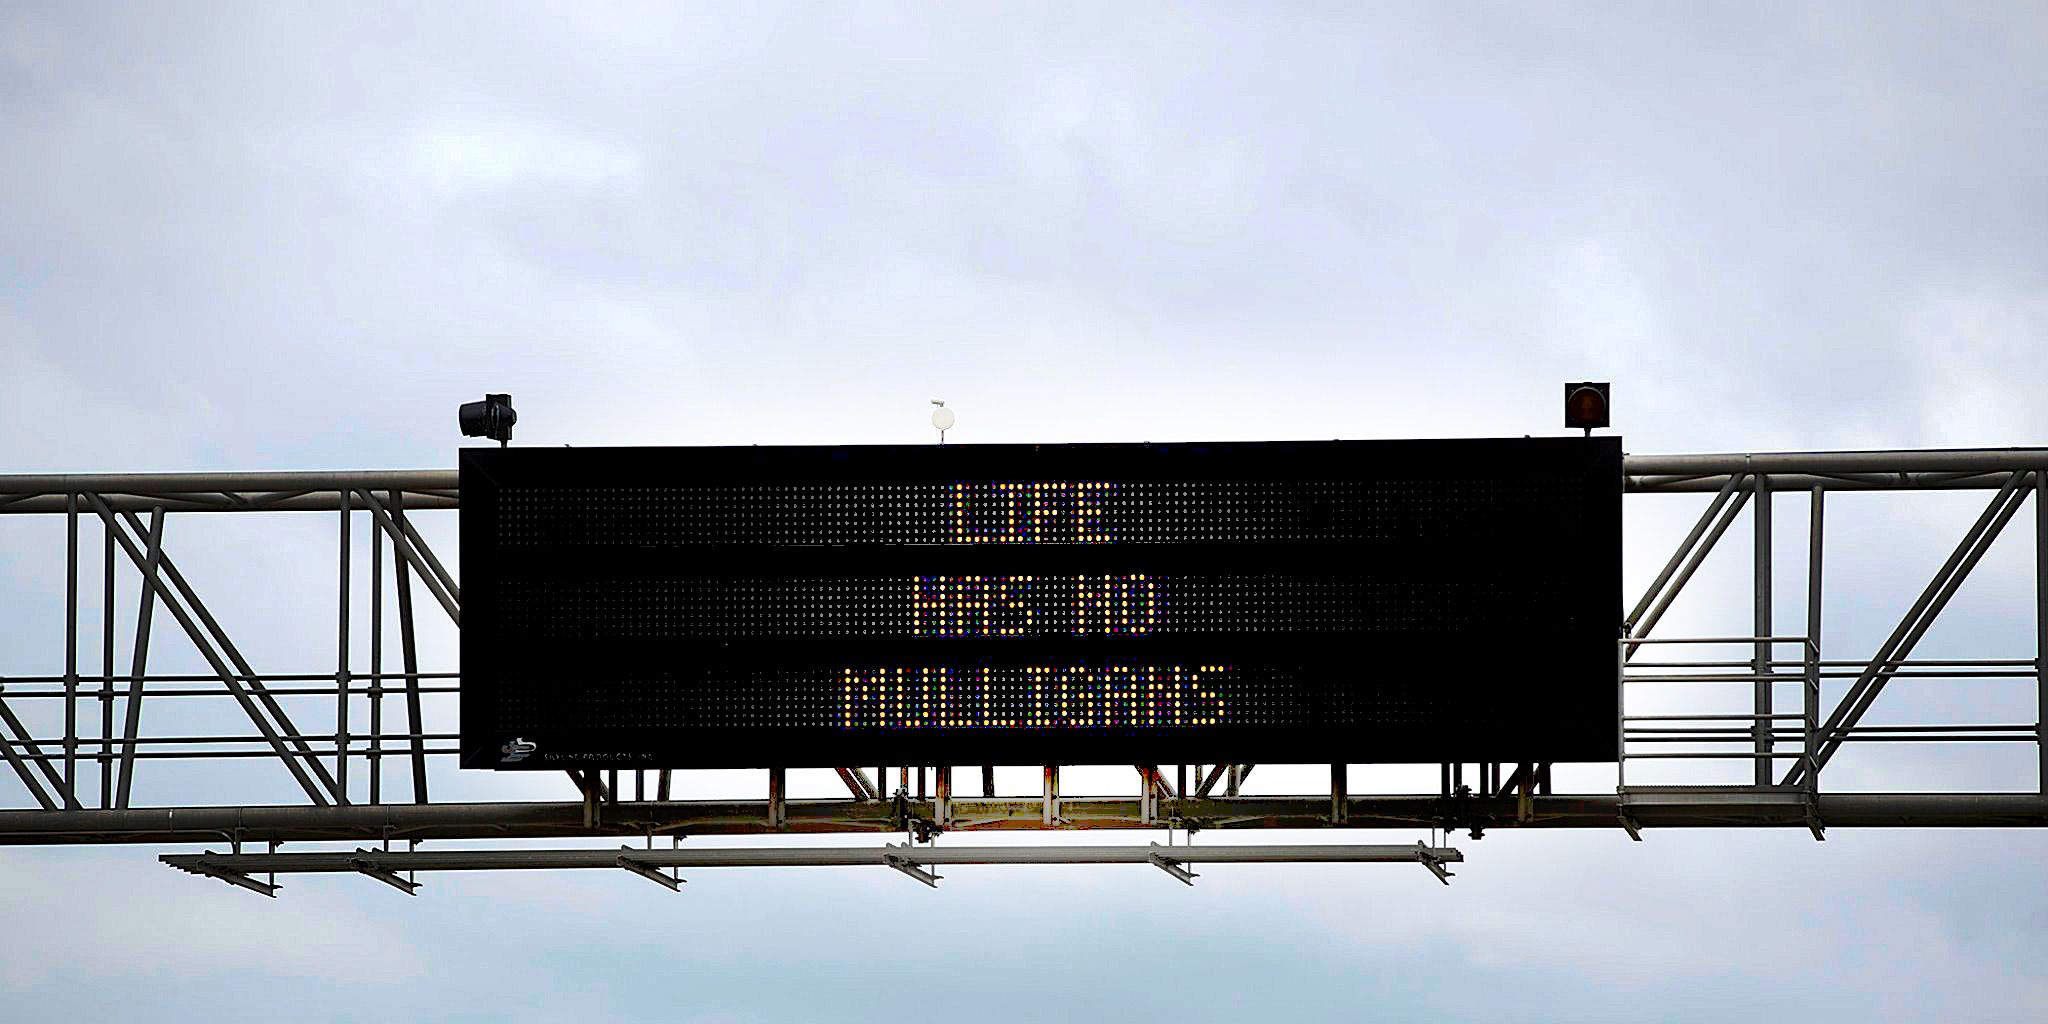 Highway Fatality Warning Signs Are Doing Real Harm